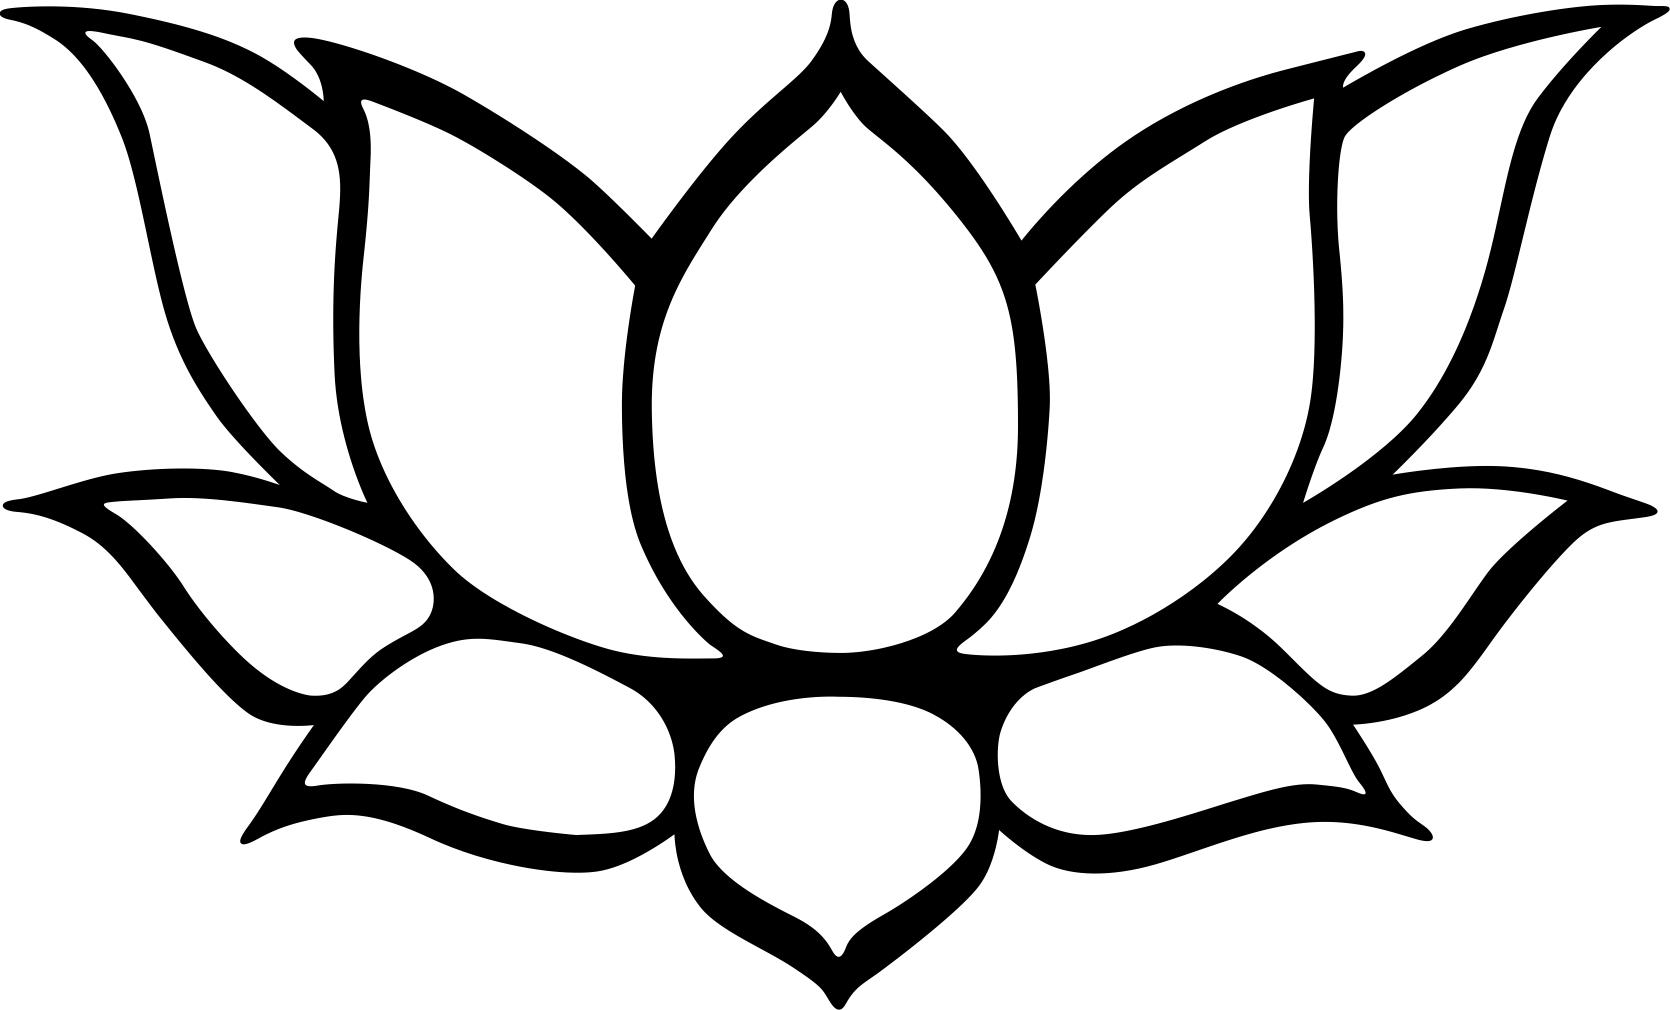 1000+ images about Sketch | We, Lotus flower drawings ...